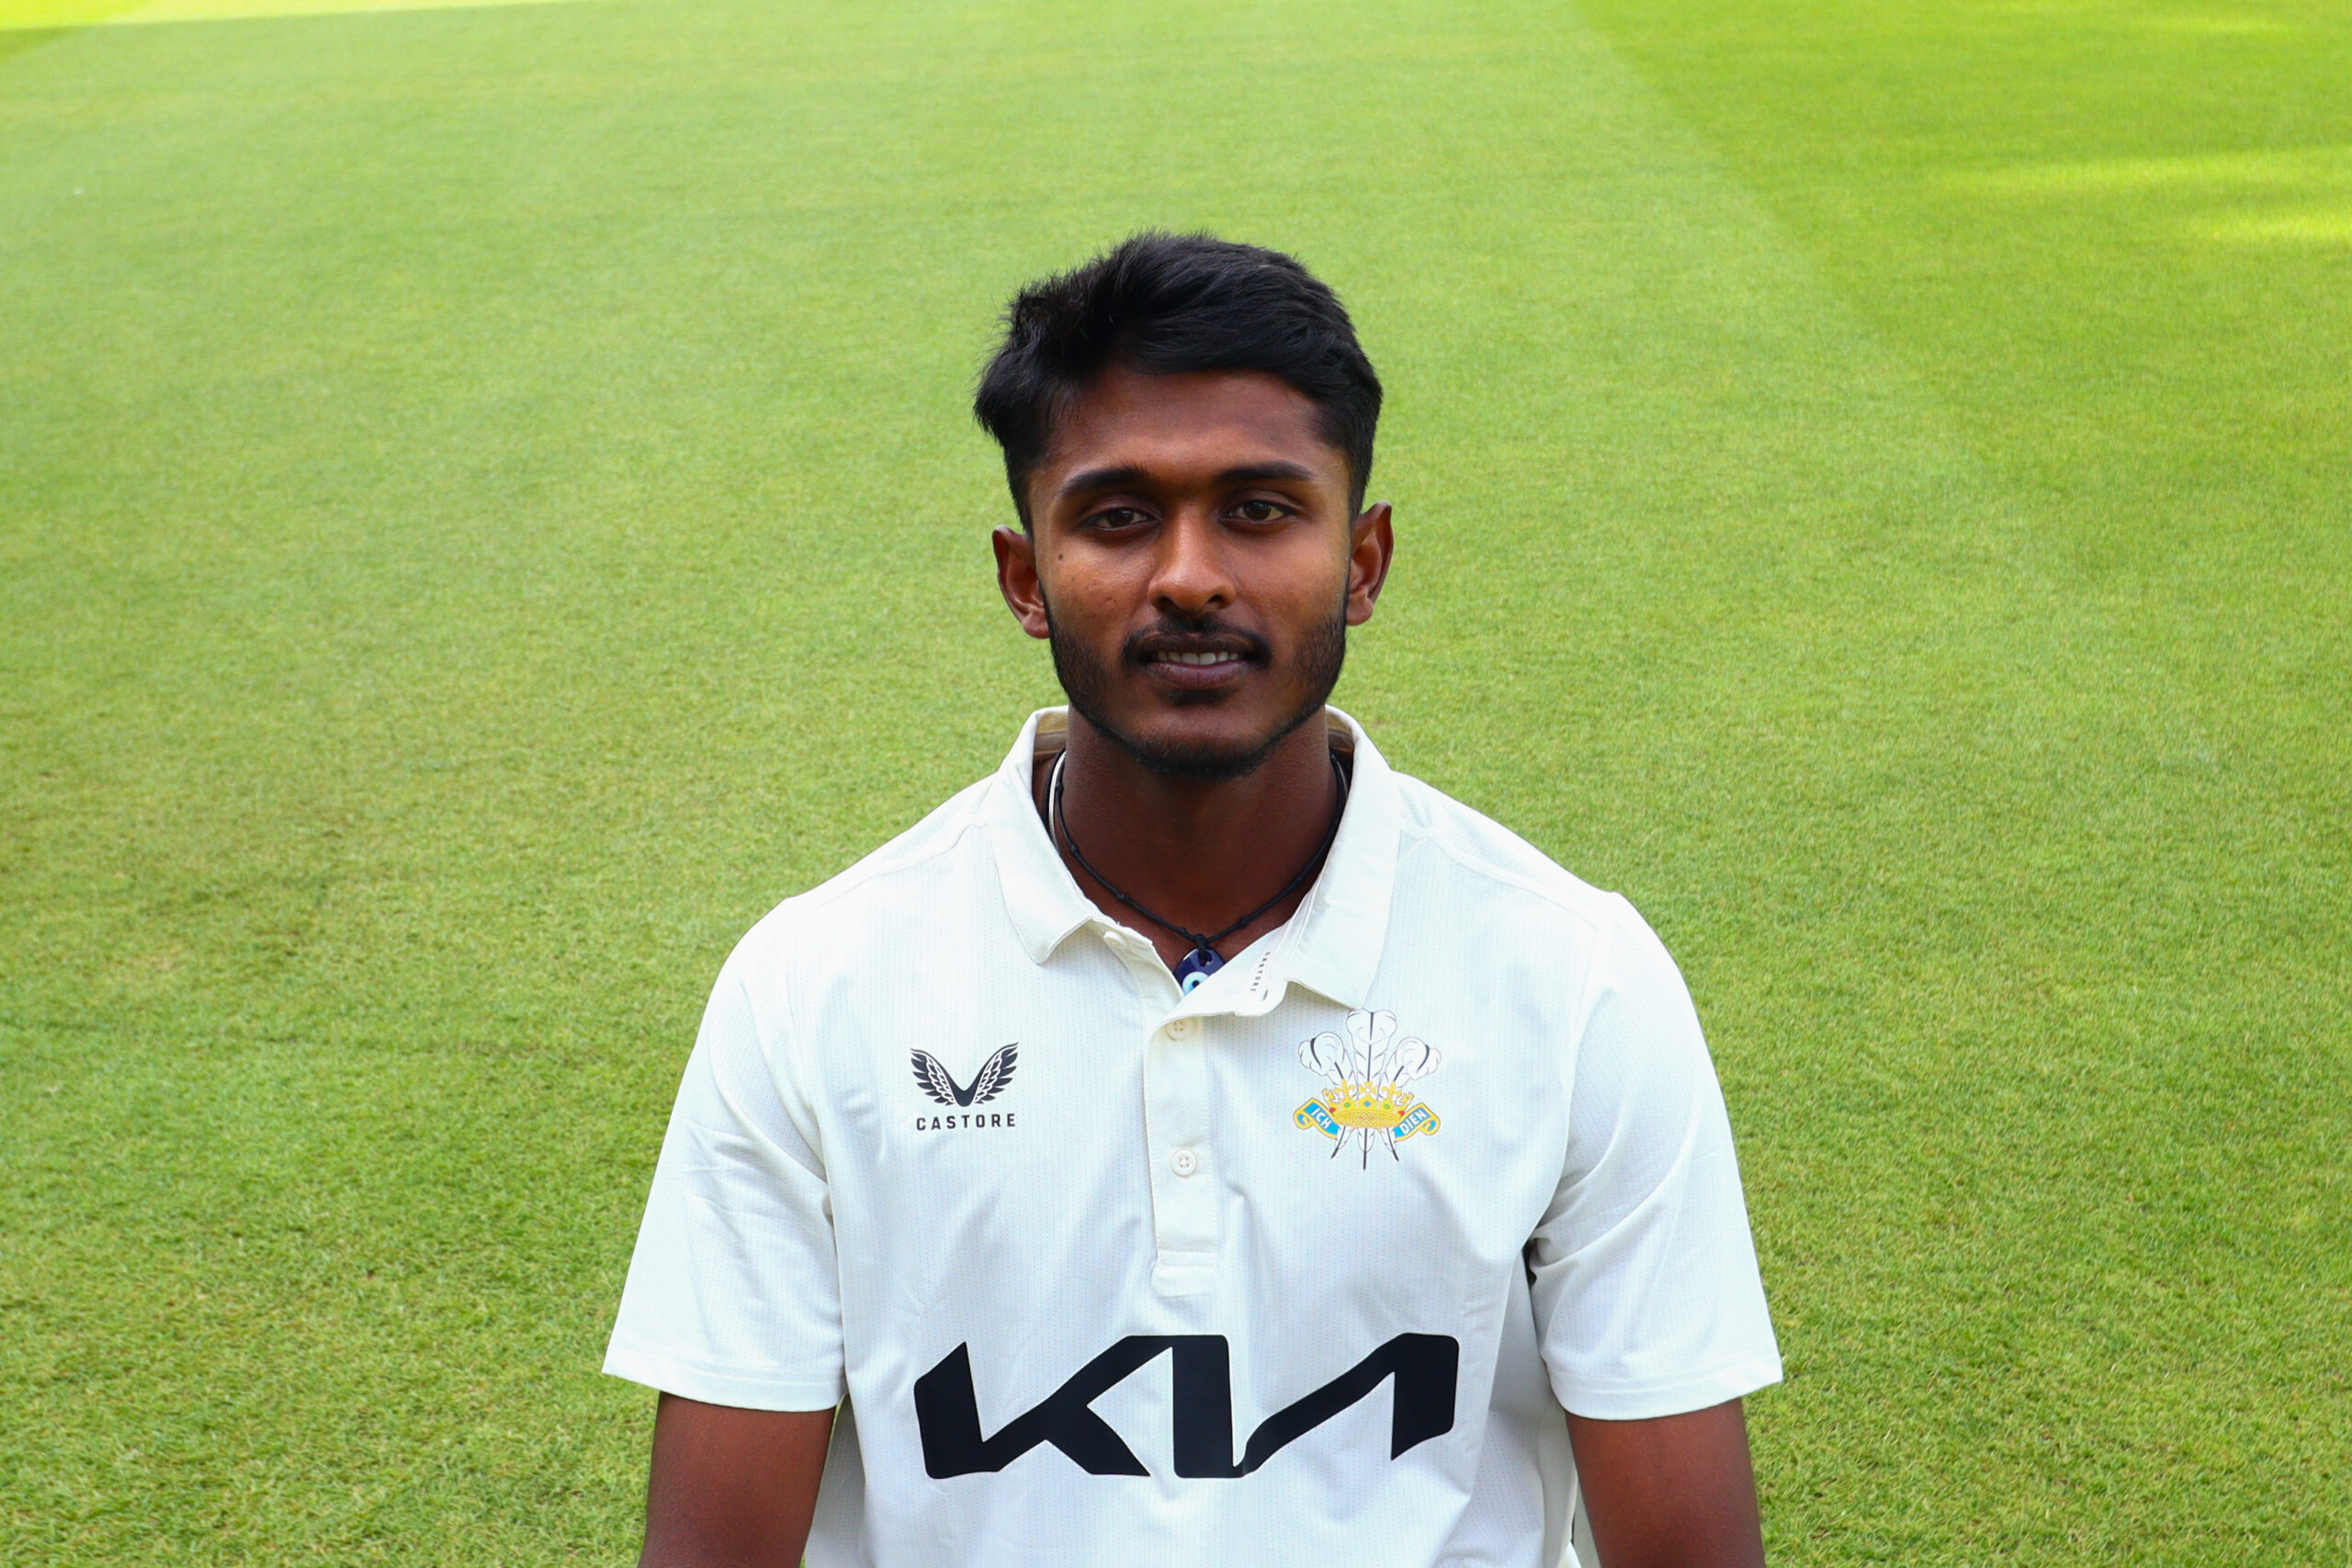 Interview with new Surrey recruit Sai Sudharsan